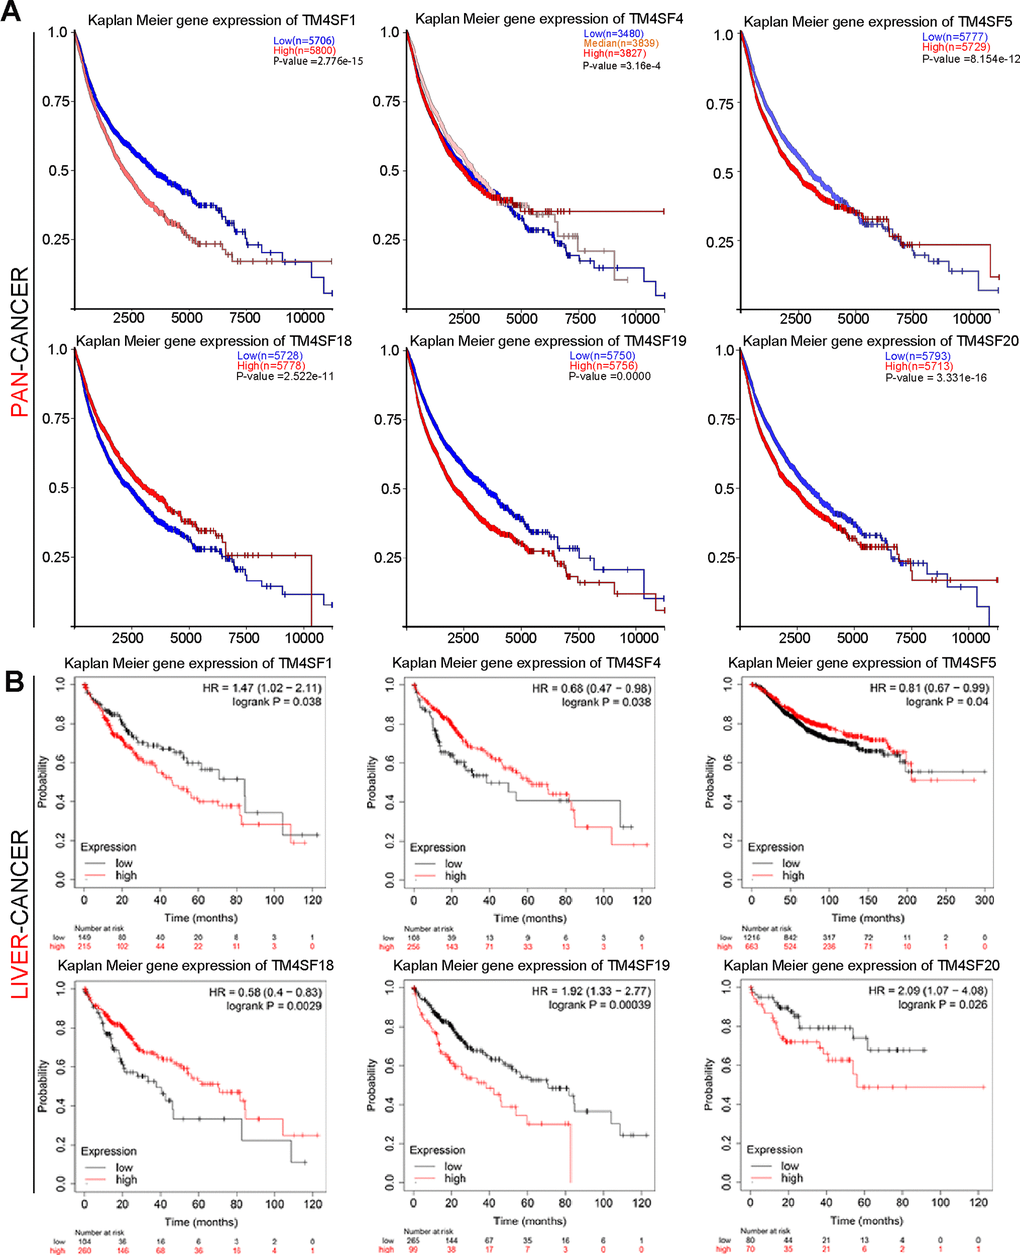 Kaplan-Meier survival curve analysis for TM4SF family members in pan-cancer (A) and liver cancer (B).